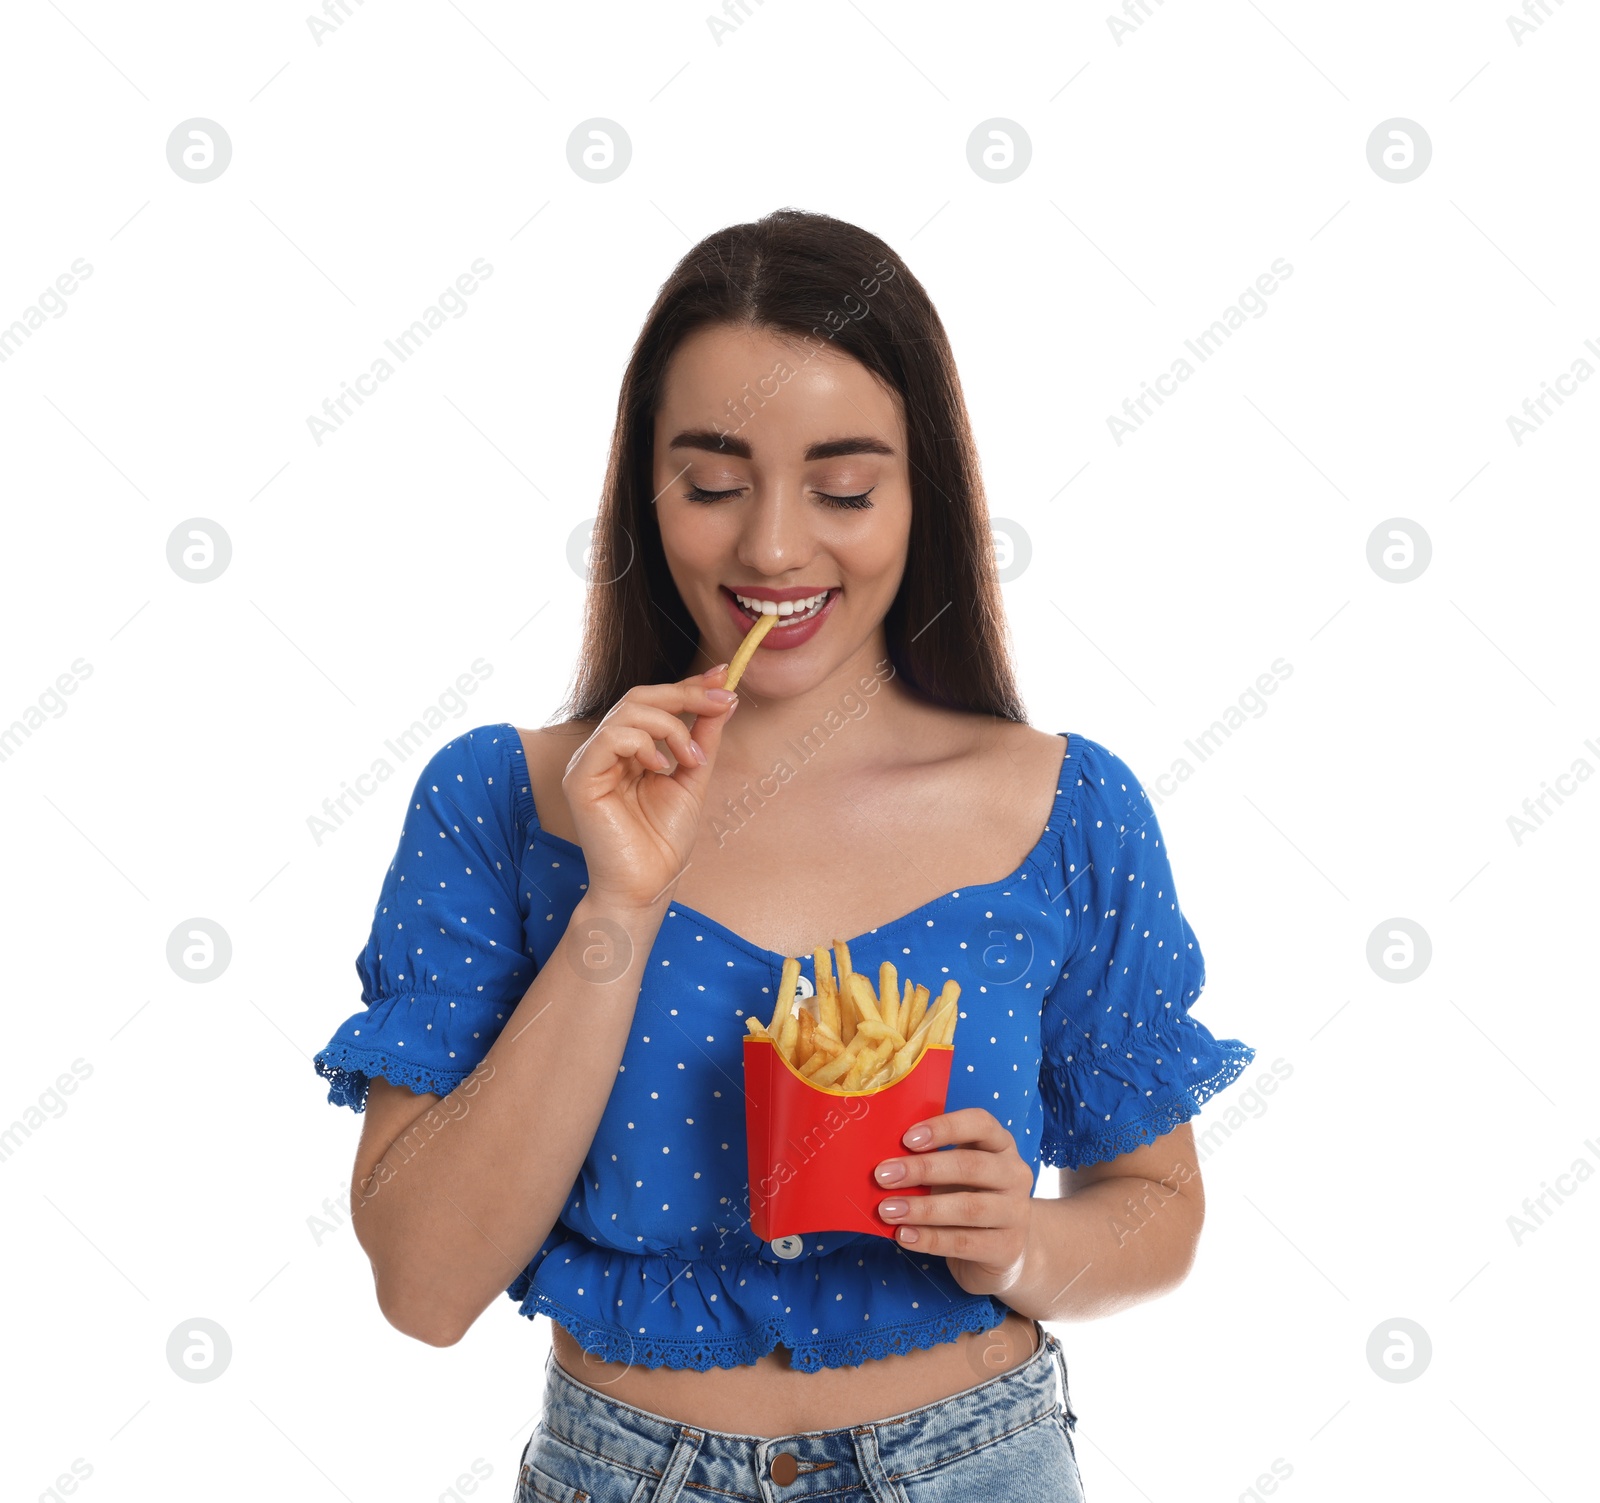 Photo of Beautiful young woman eating French fries on white background